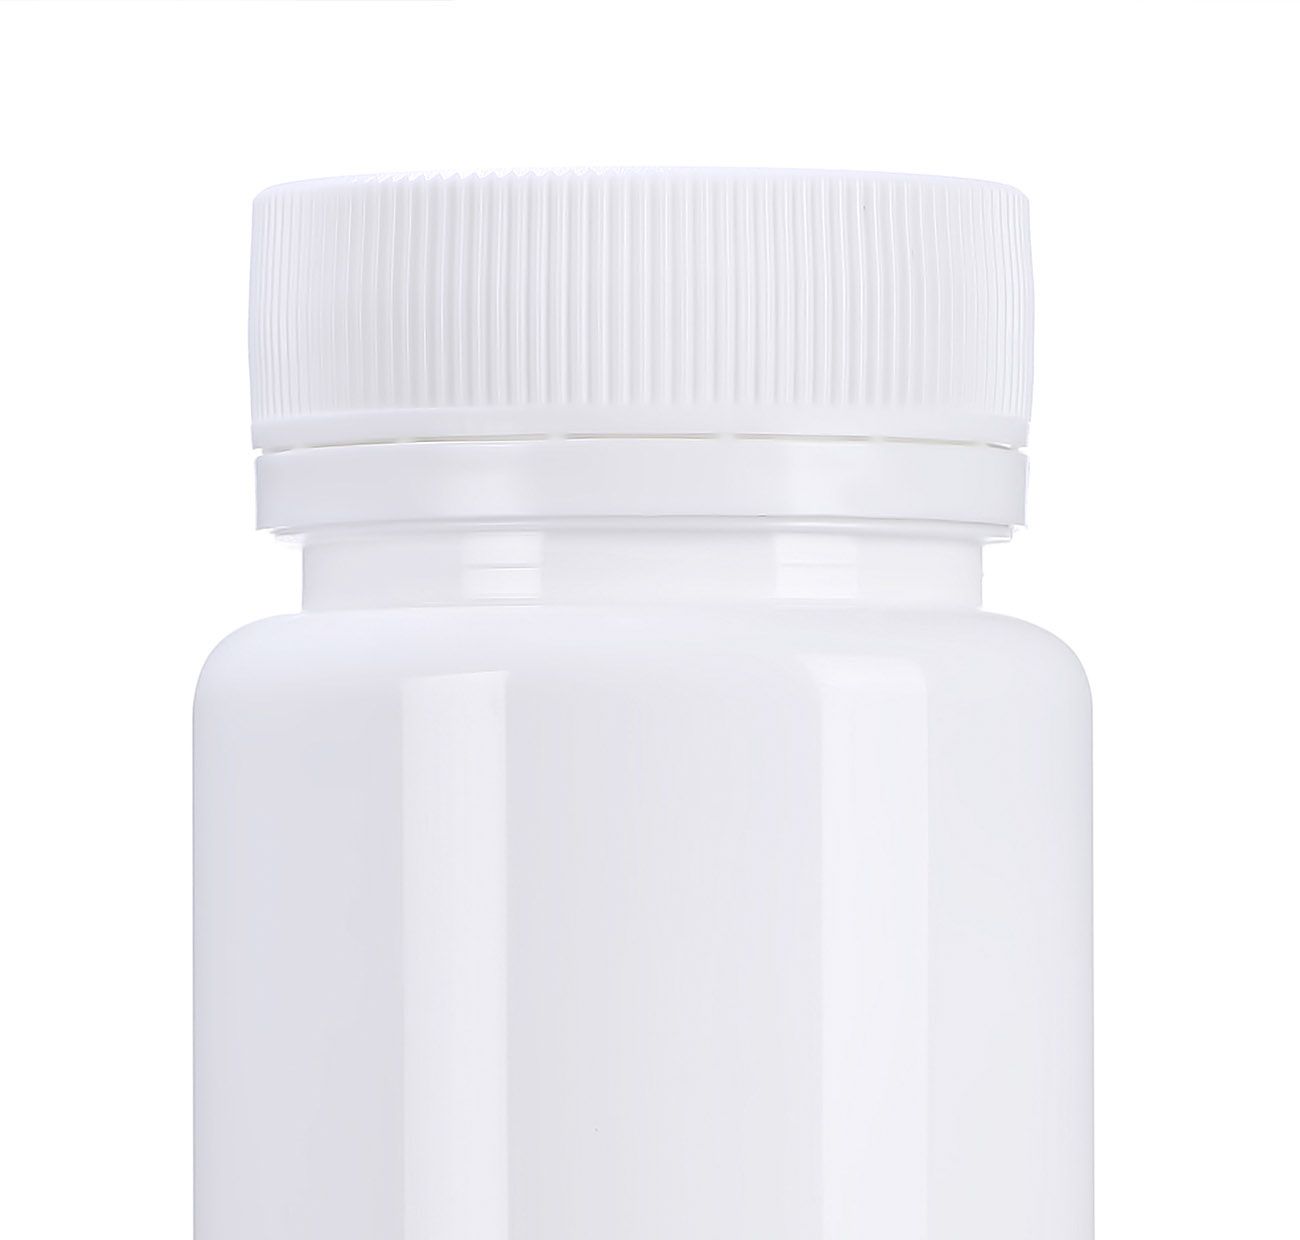 <p>A 12 ml container in white color, topped with a tear-off band cap. This container is suitable for storage of solid medical and pharmaceutical products like tablets (vitamins, capsules, dietary supplements, etc.) or ointments, creams, etc. Containers differ in shape, volume, and neck size. Please consider the size and/or volume of your product before making a choice.</p>